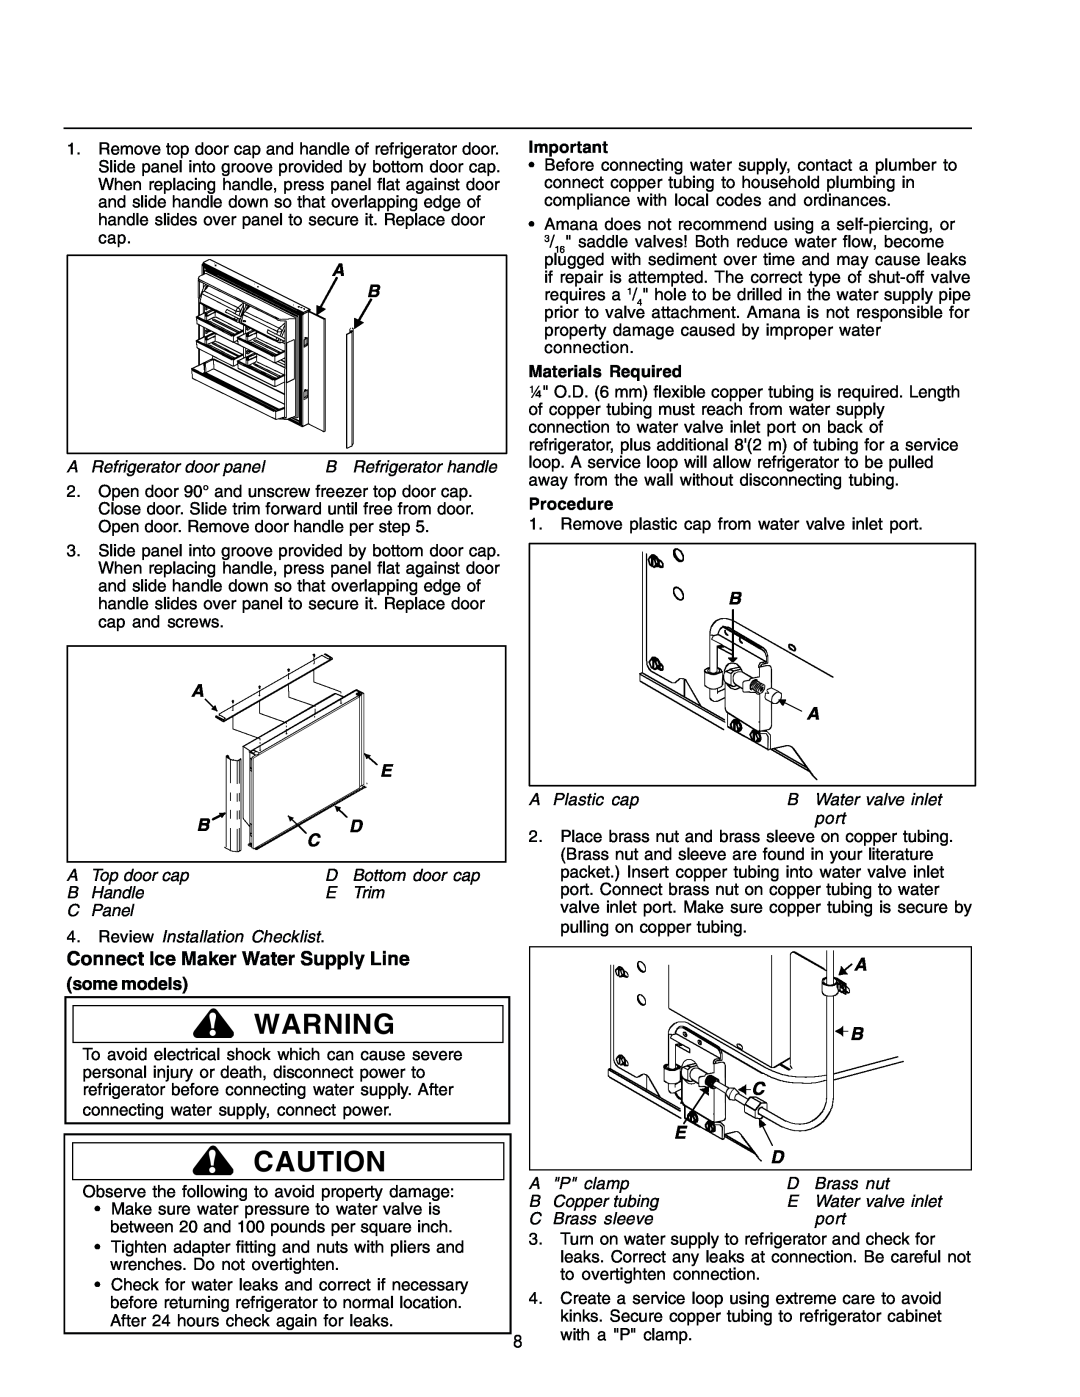 Amana IA 52204-0001 owner manual Connect Ice Maker Water Supply Line, some models, Materials Required, Procedure 